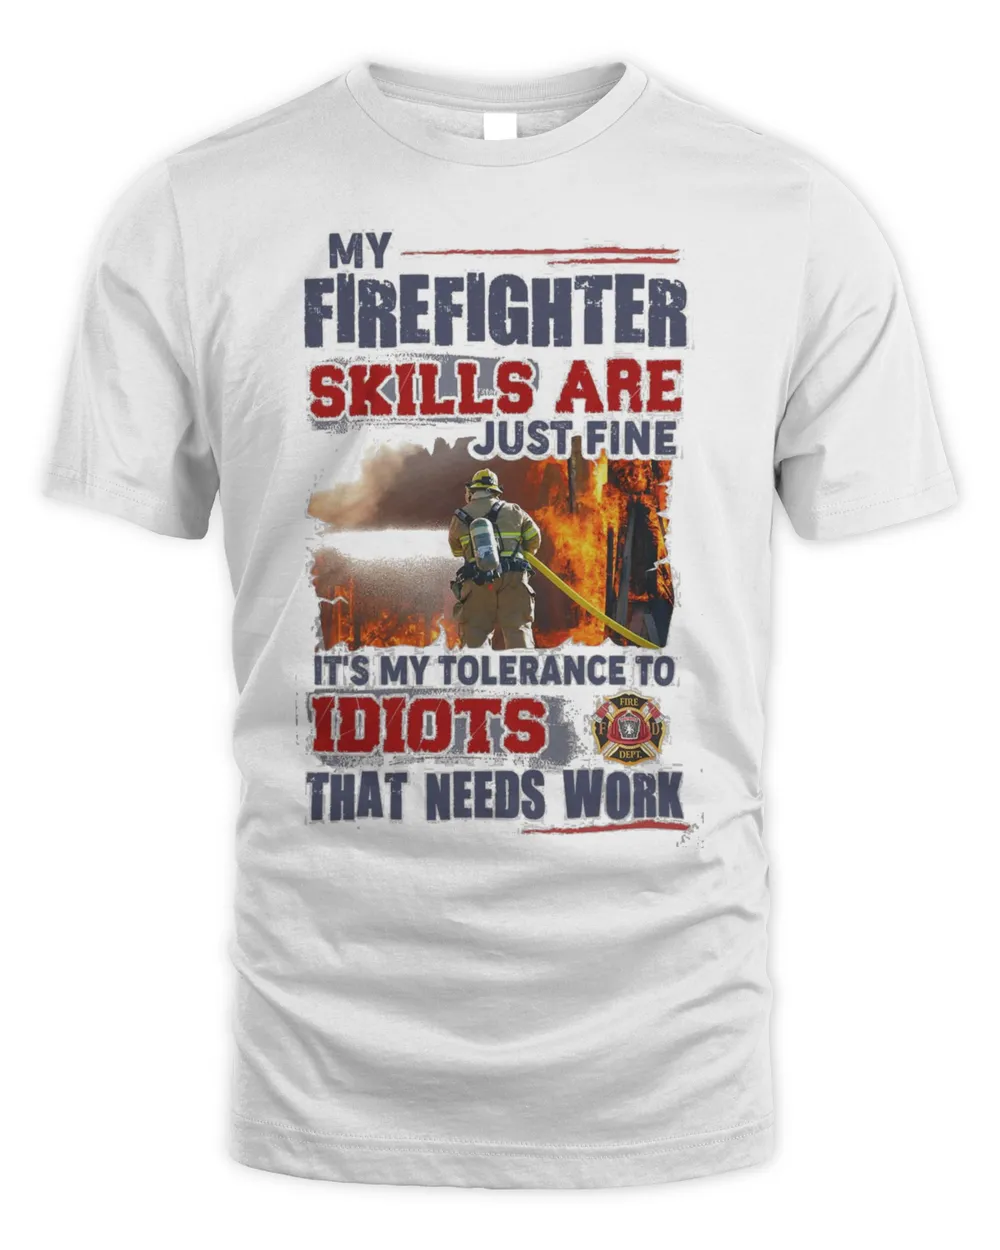 My Firefighter Skills Are Just Fine It's My Tolerance To Idiots That Needs Work Shirt